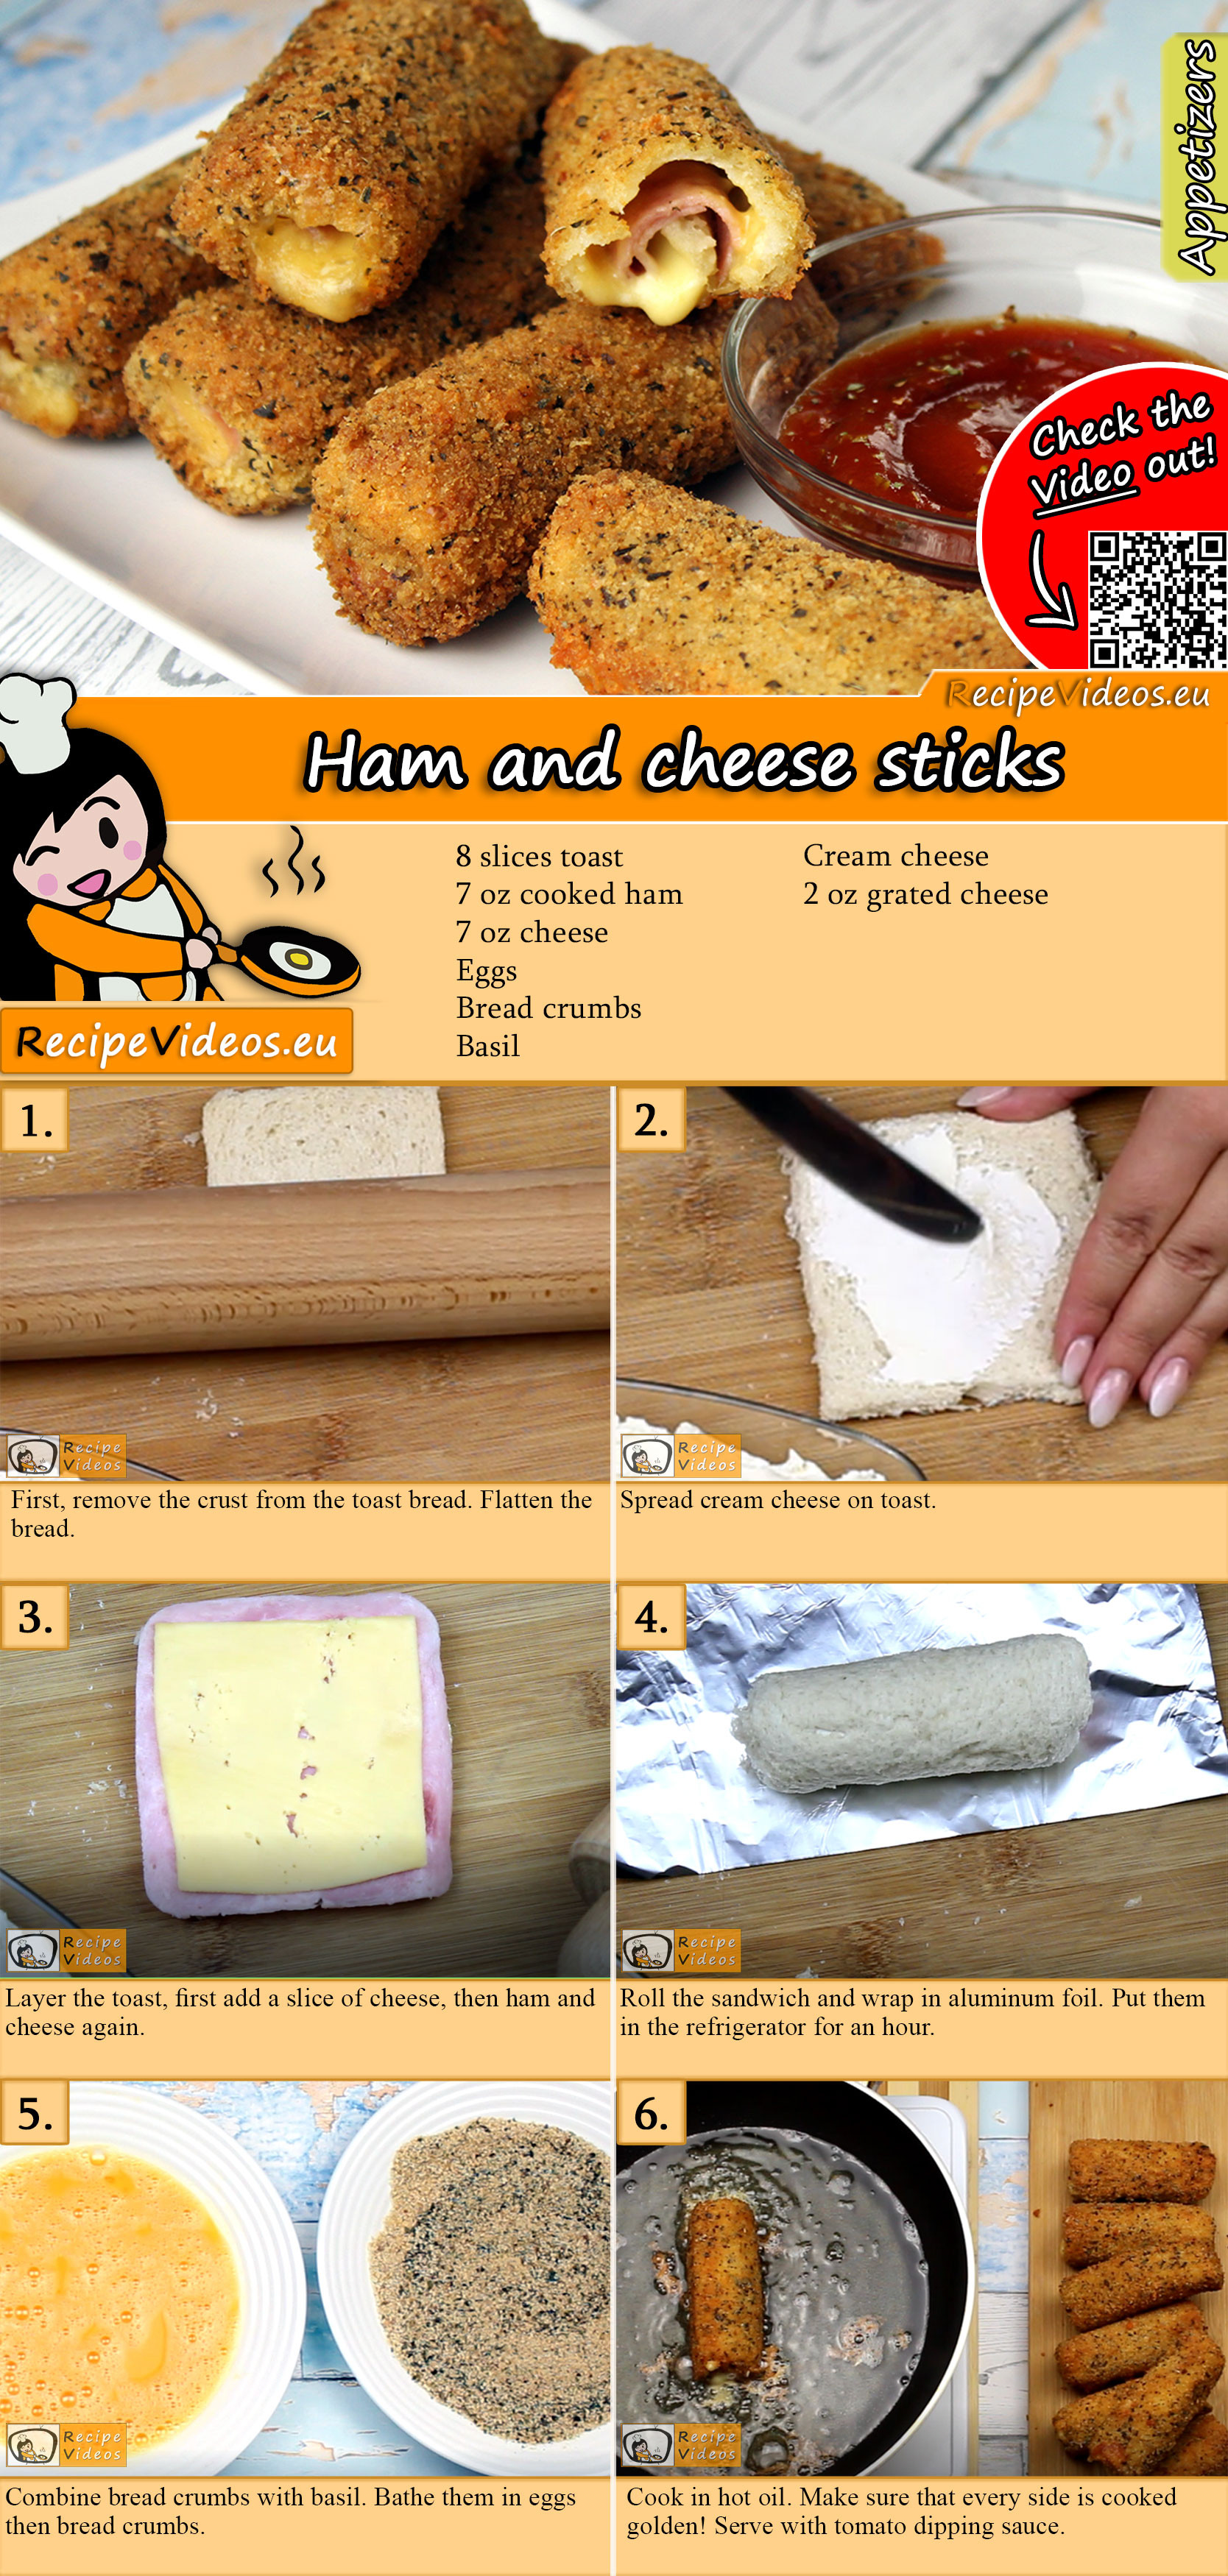 Ham and cheese sticks recipe with video